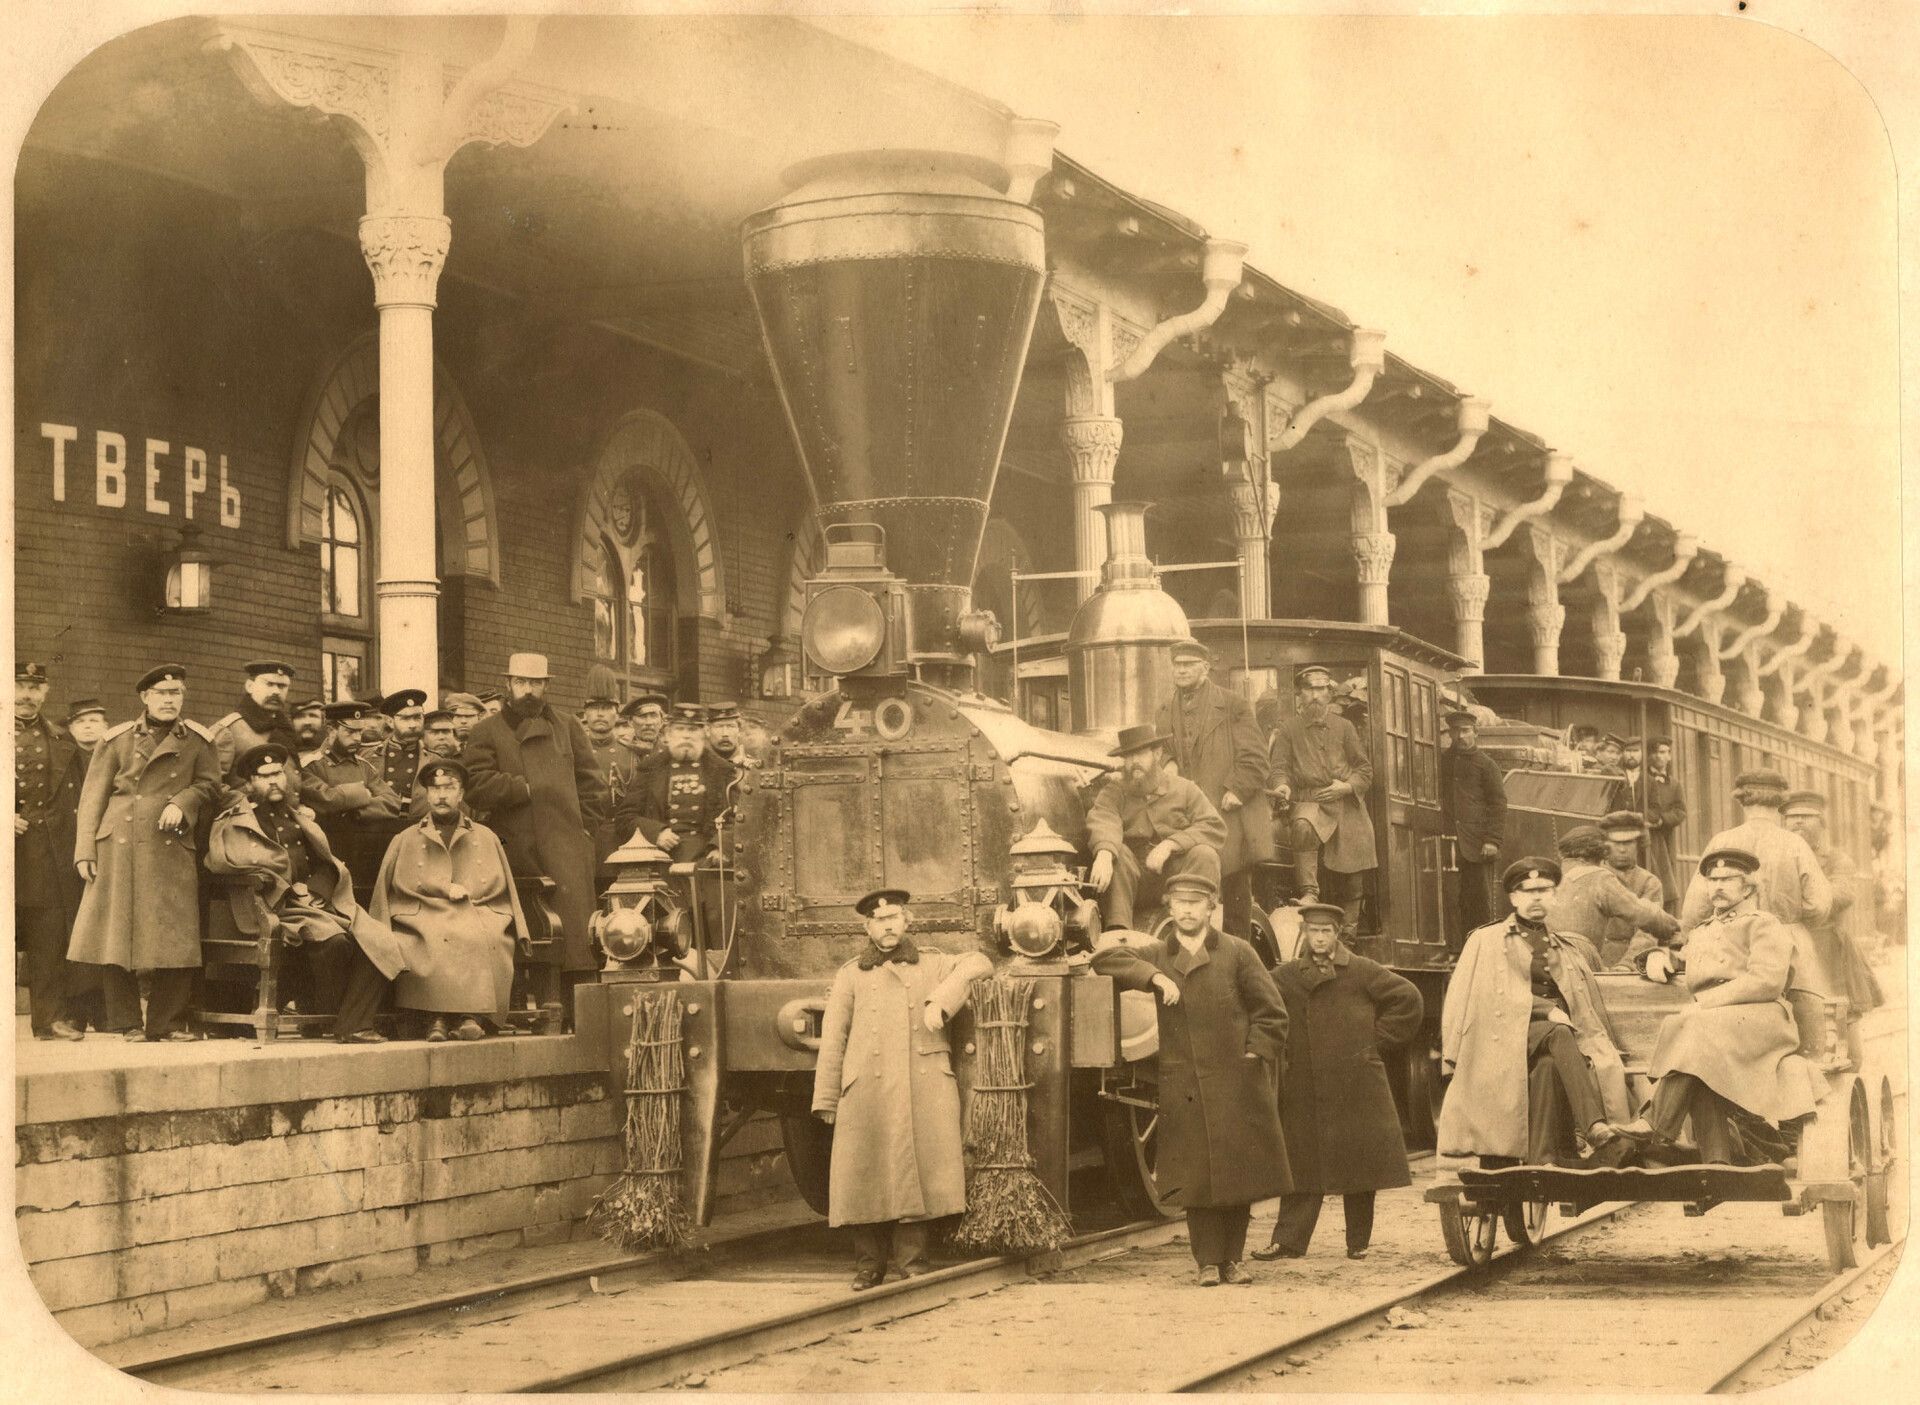 The railroad in Tver, early 20th century